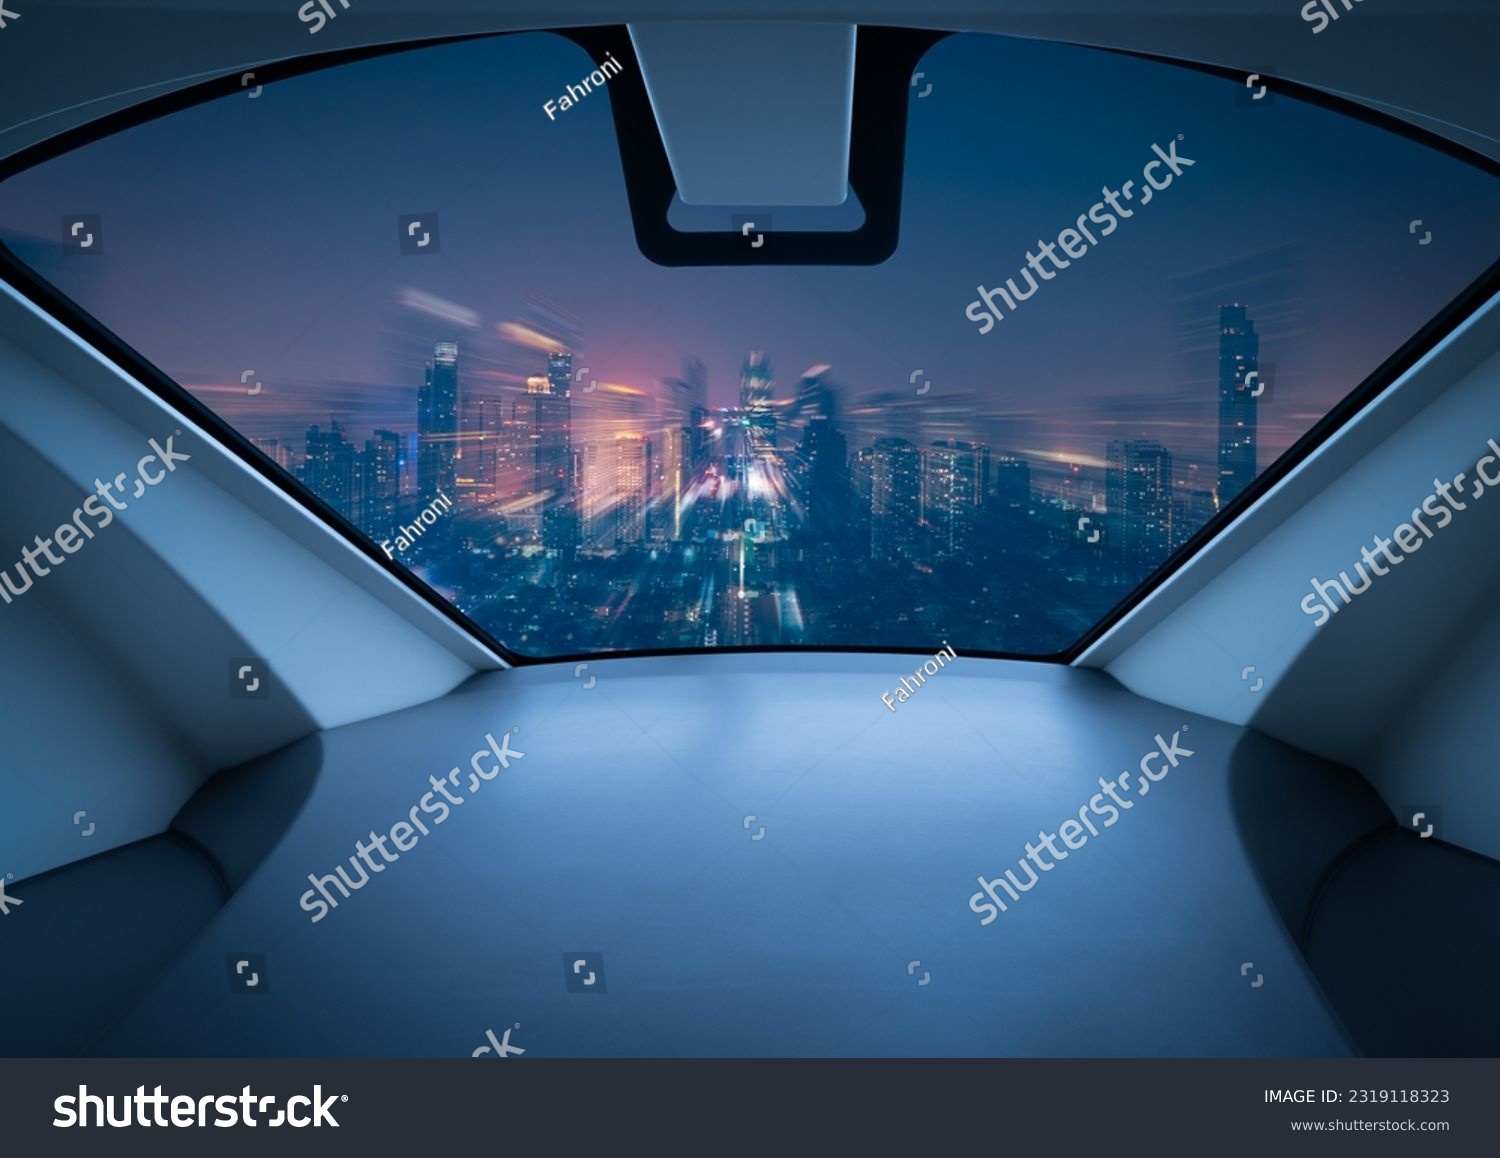 Air taxi window view of city at night. Air vehicle. Personal air transport. Autonomous aerial taxi. Flying car. Urban aviation. Futuristic technology. Passenger drone. Electric VTOL passenger aircraft #2319118323